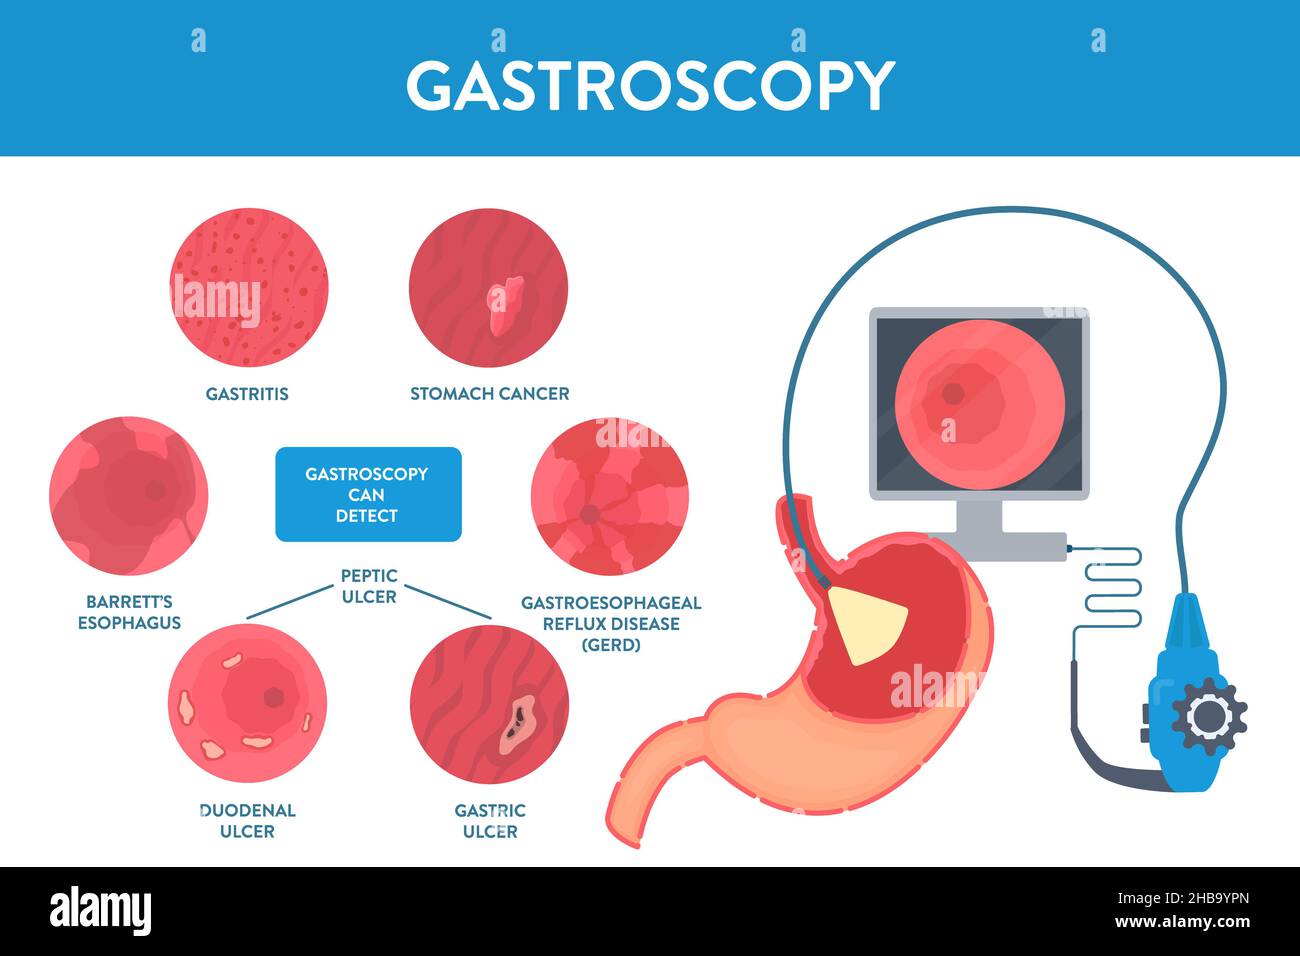 Gastroscopy, conceptual illustration. Gastroscopy is a procedure used to look at the oesophagus, stomach and the duodenum. It can be used to detect diseases, for example from left to right: stomach cancer, gastroesophageal reflux disease (GERD), gastric ulcer, duodenal ulcer, barrett's esophagus and gastritis. Stock Photo